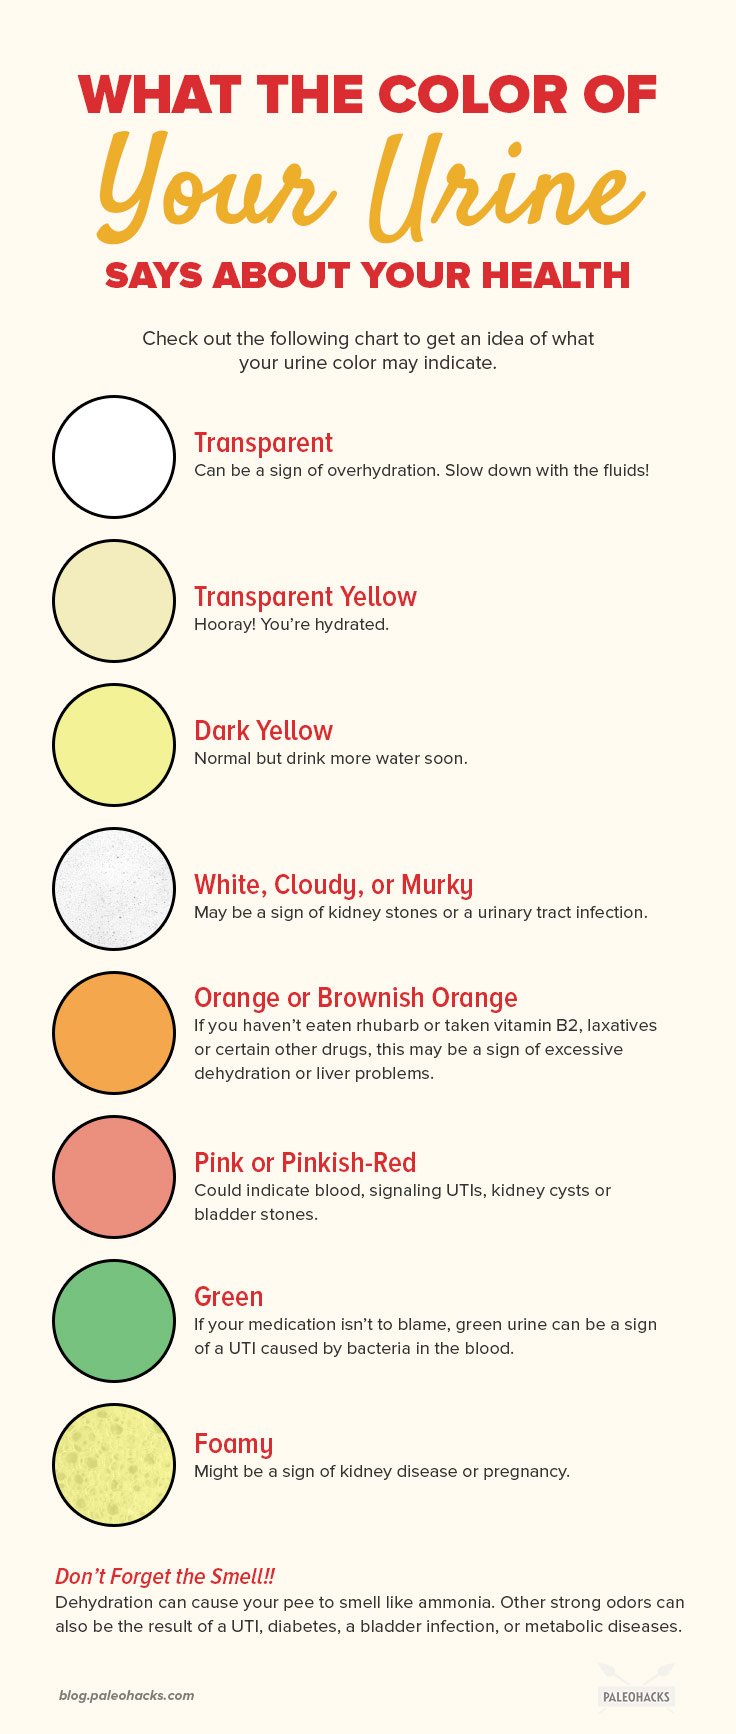 What-The-Color-of-Your-Urine-Says-About-Your-Health-infog.jpg